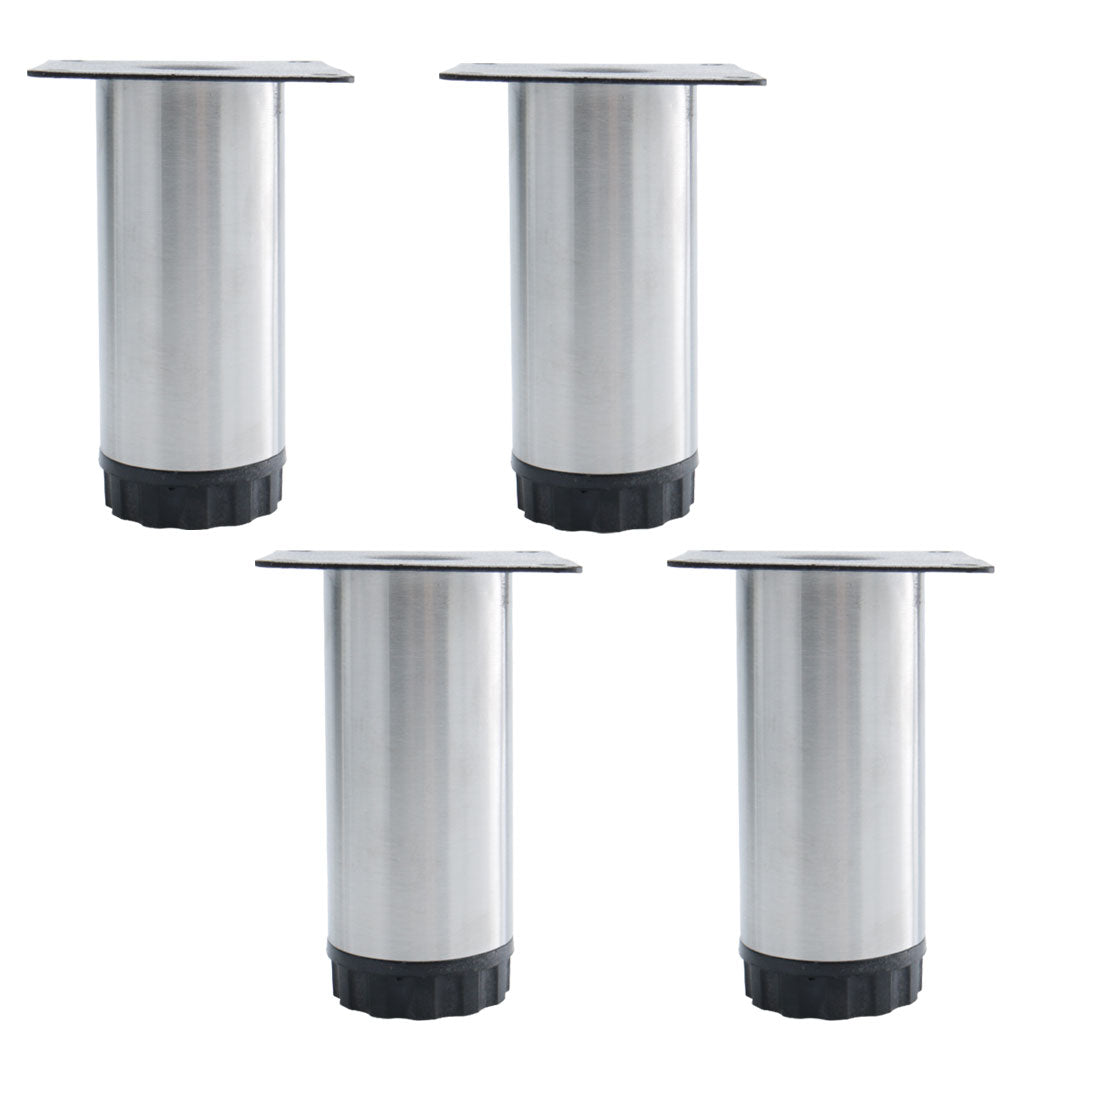 uxcell Uxcell 6" Furniture Legs Stainless Steel Sofa Table Adjustable Feet Replacement 4pcs